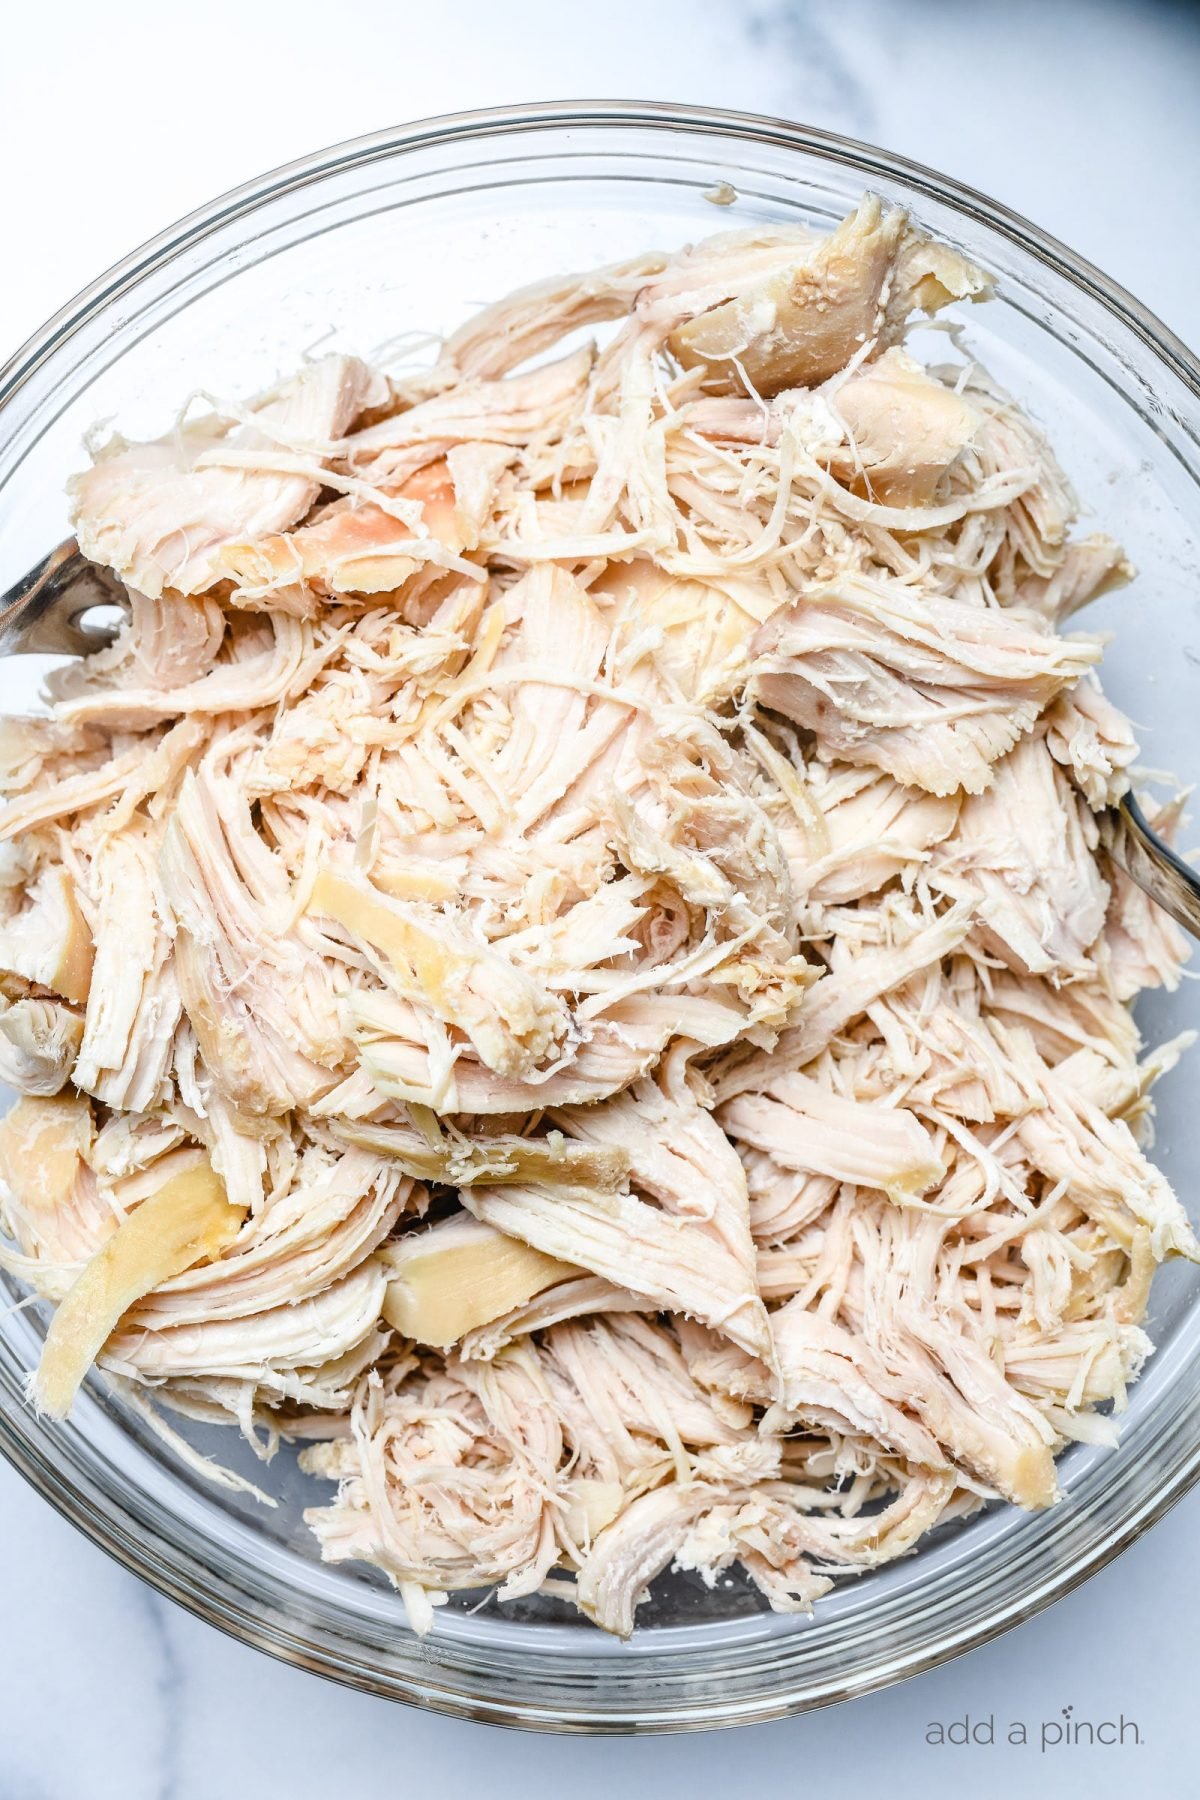 Cooked and shredded chicken in a glass bowl on a marble surface.